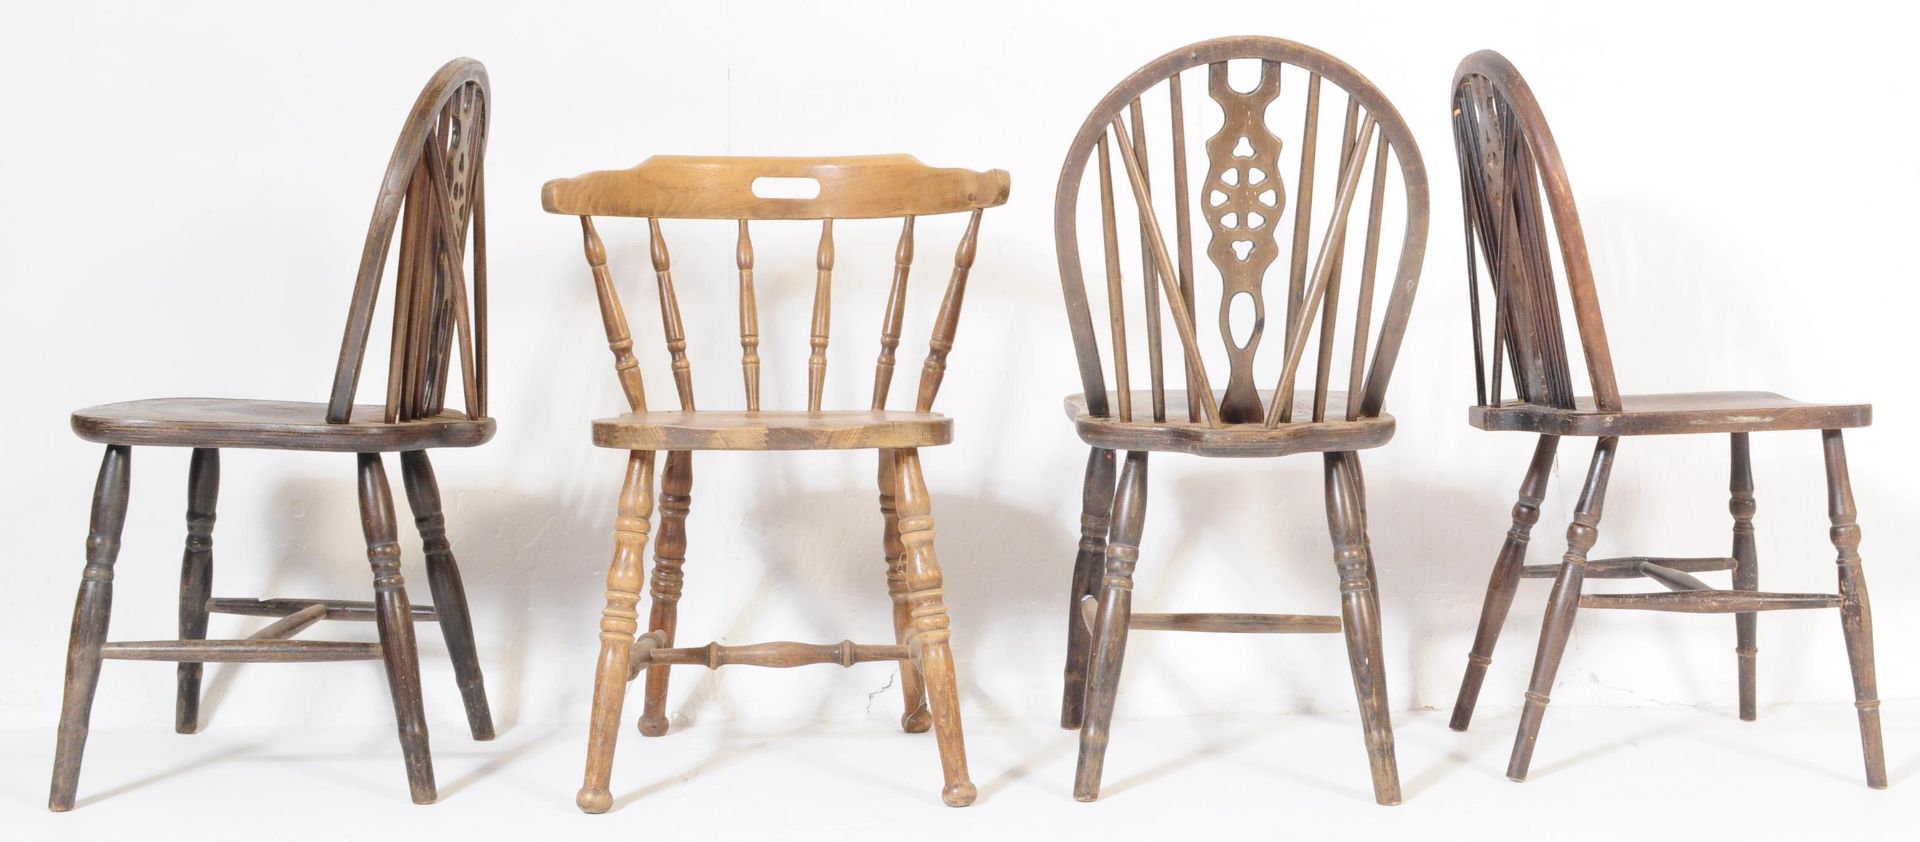 EARLY 20TH CENTURY OAK WINDSOR WHEEL BACK CHAIRS - Image 3 of 5